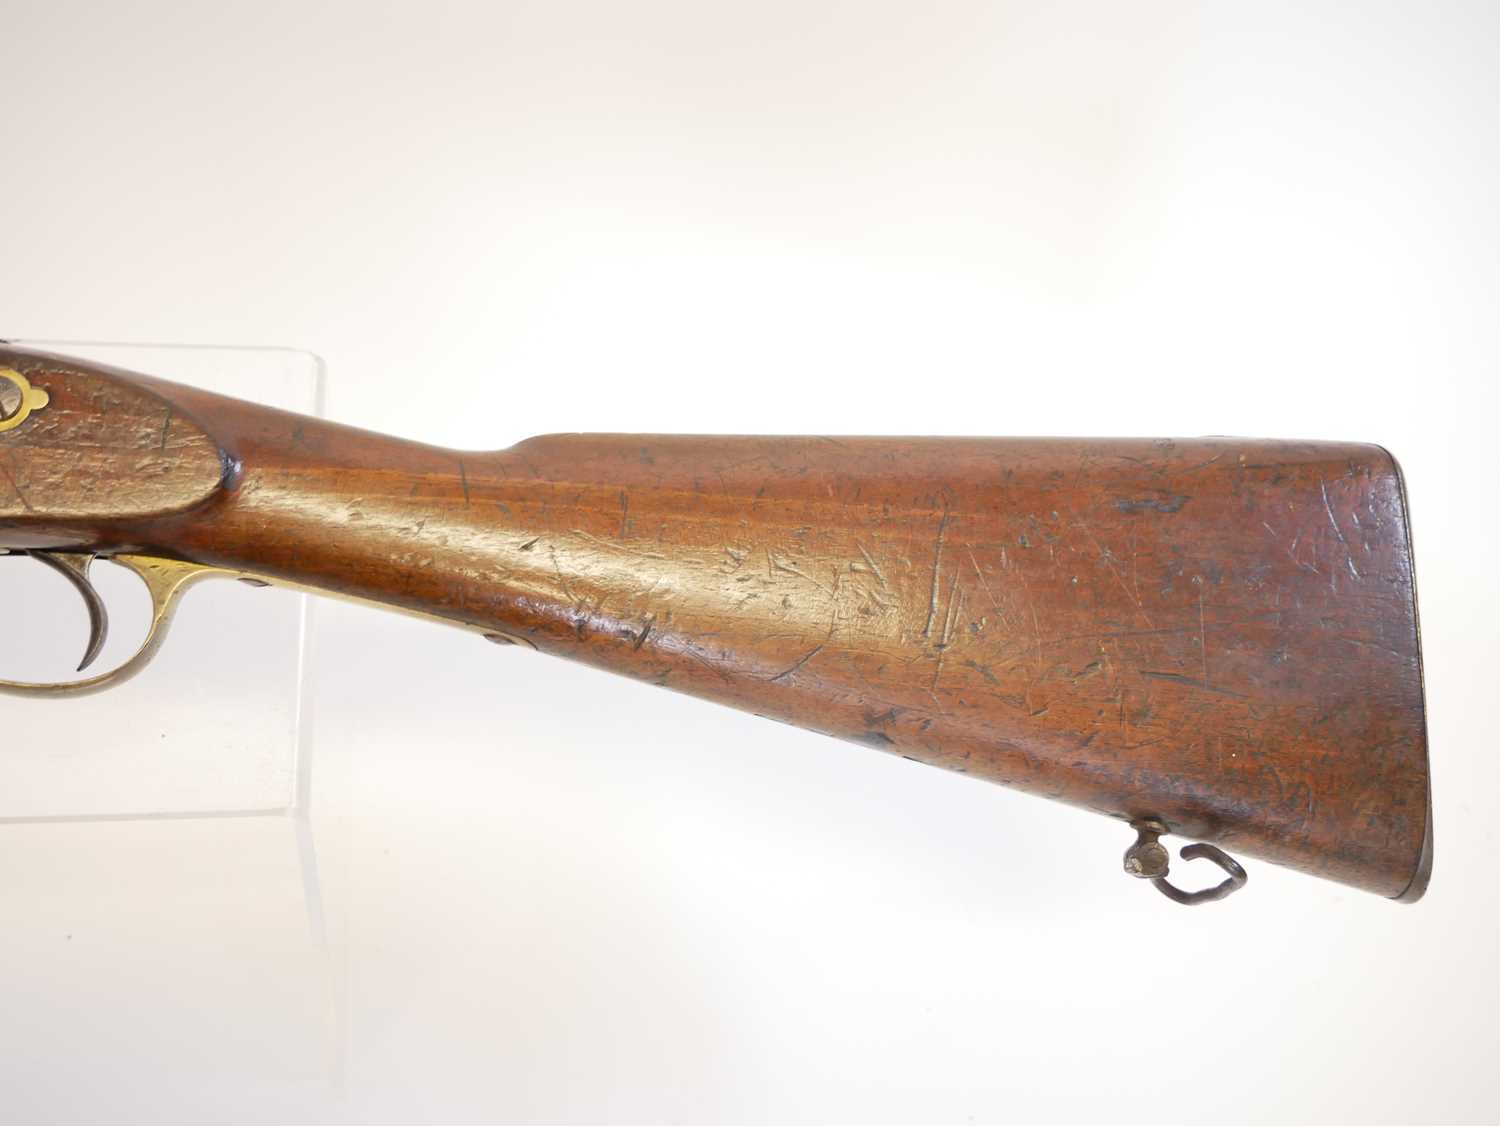 London Small Arms .577 Snider carbine, 21inch barrel with bayonet lug and folding ladder sight, - Image 12 of 16